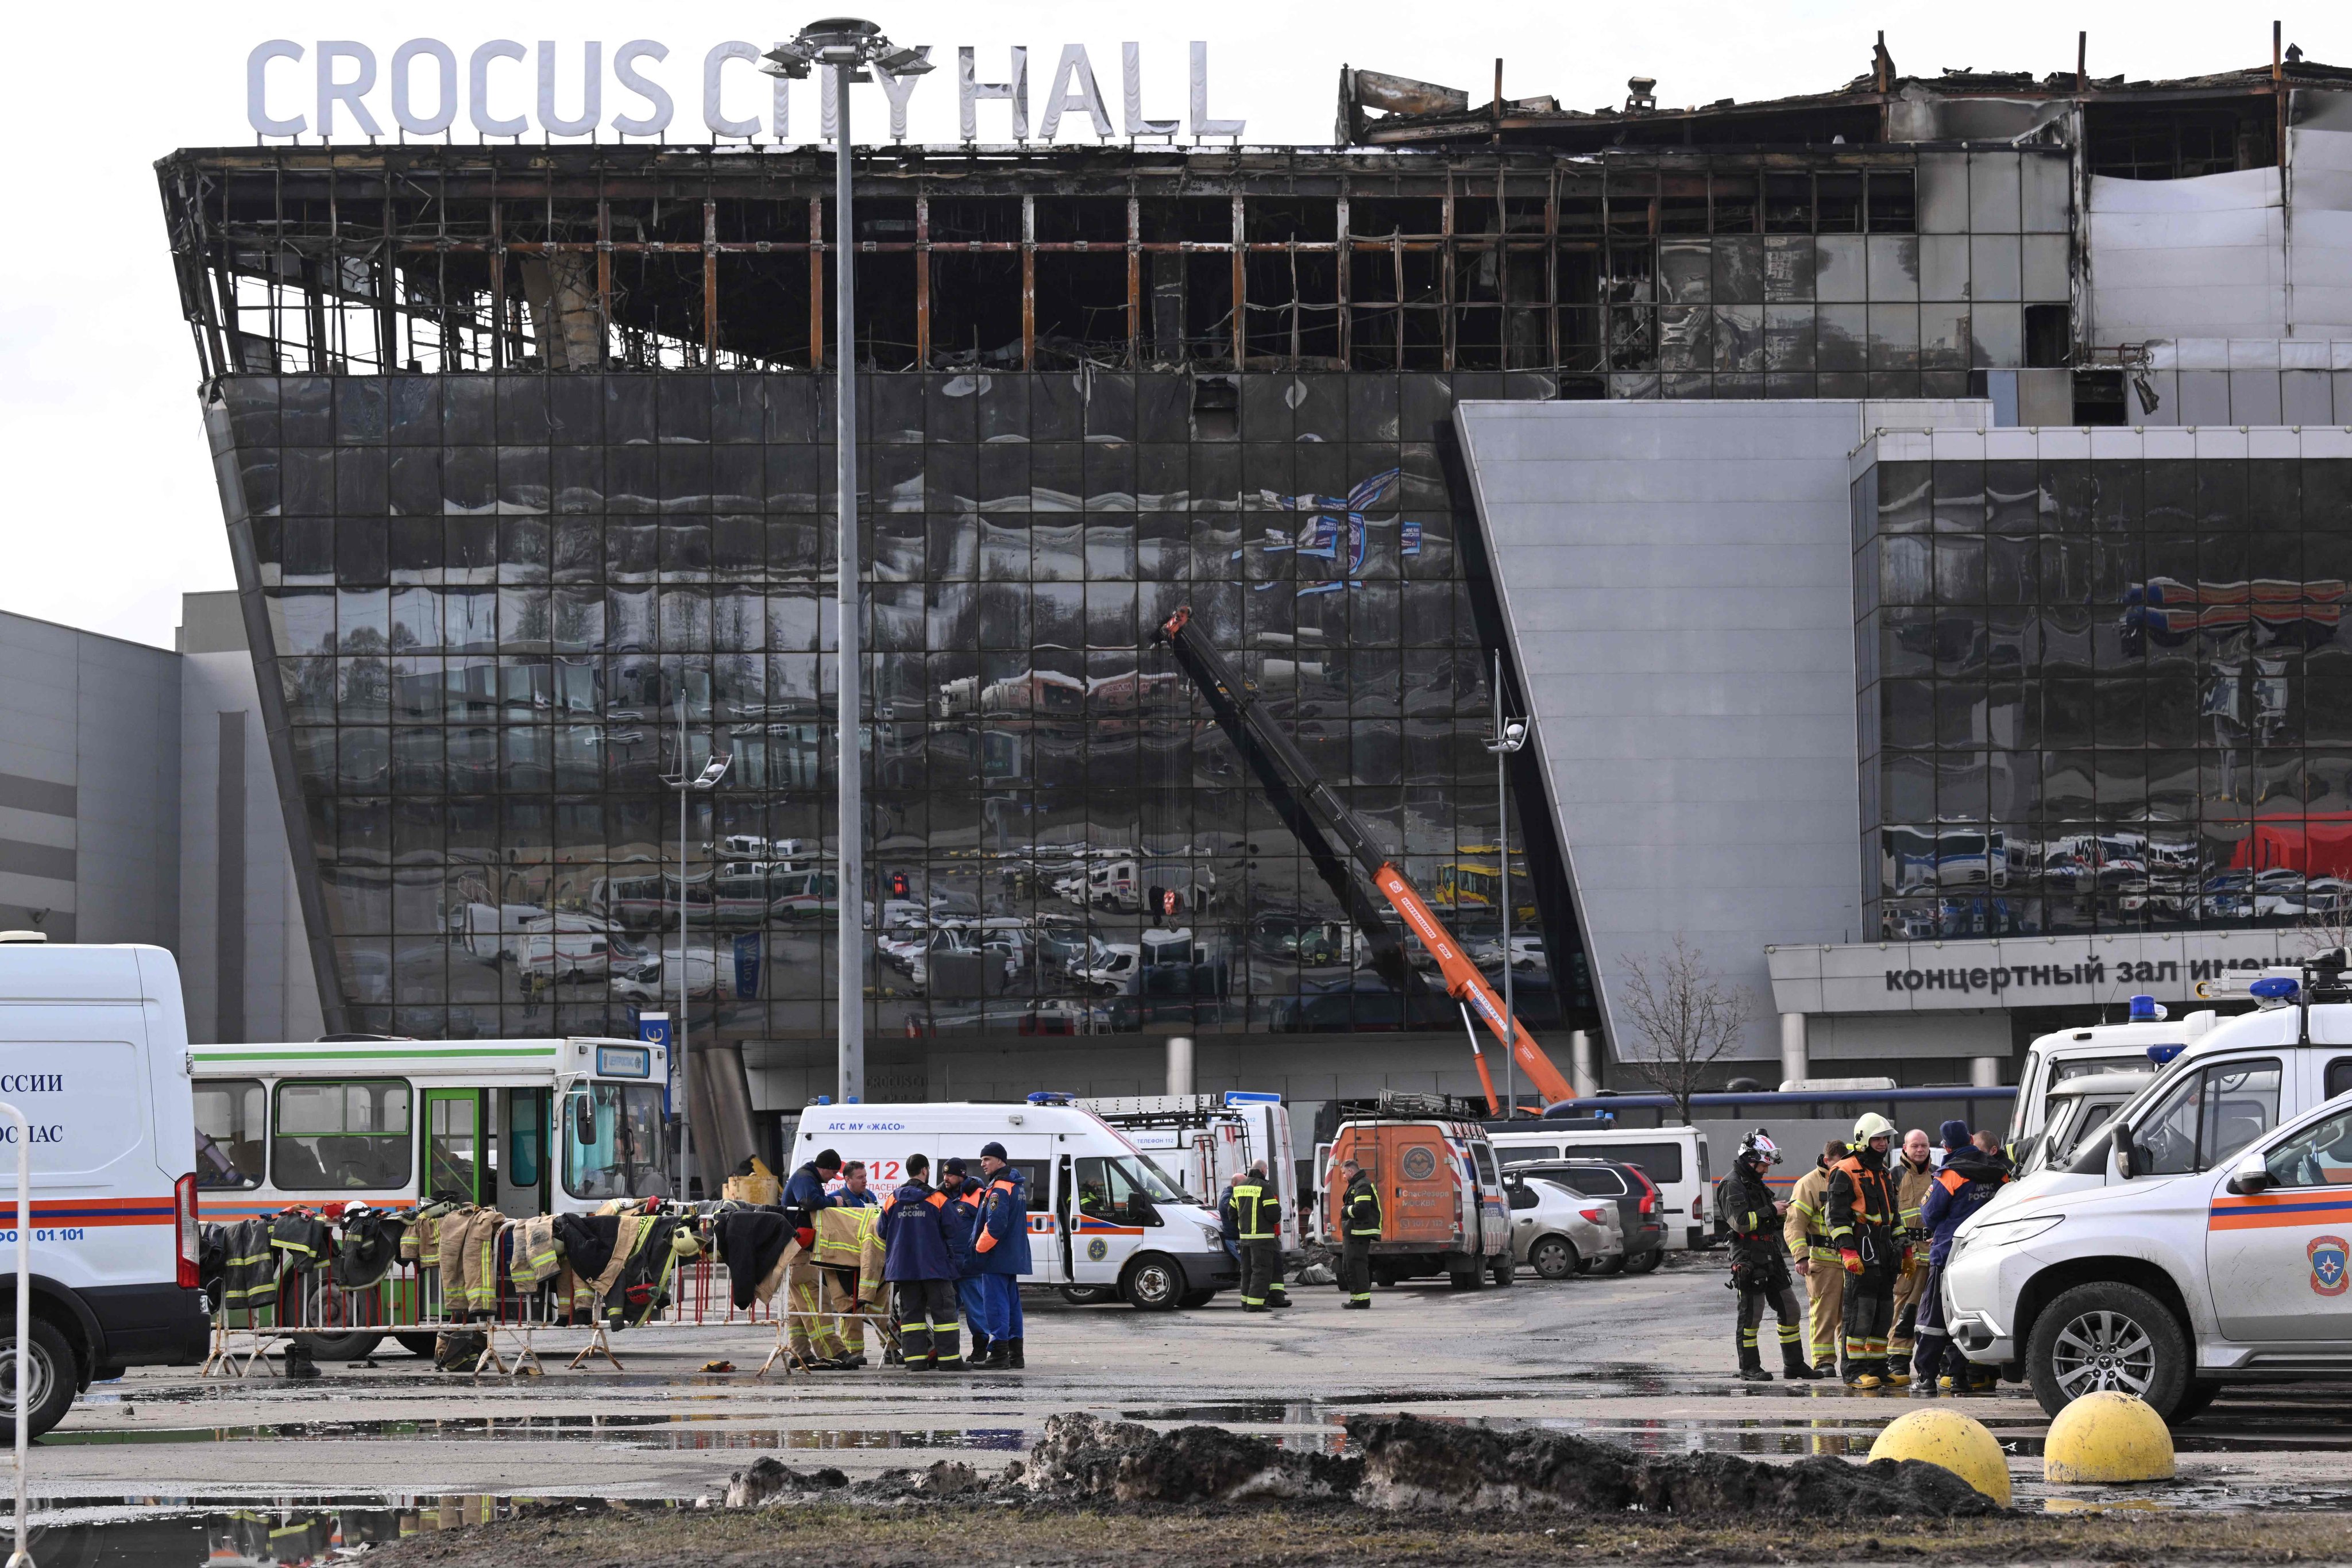 The burnt-out Crocus City Hall in Krasnogorsk outside Moscow. Islamic State jihadists claimed responsibility for the attack on the venue last week that killed more than 140 people. Photo: AFP